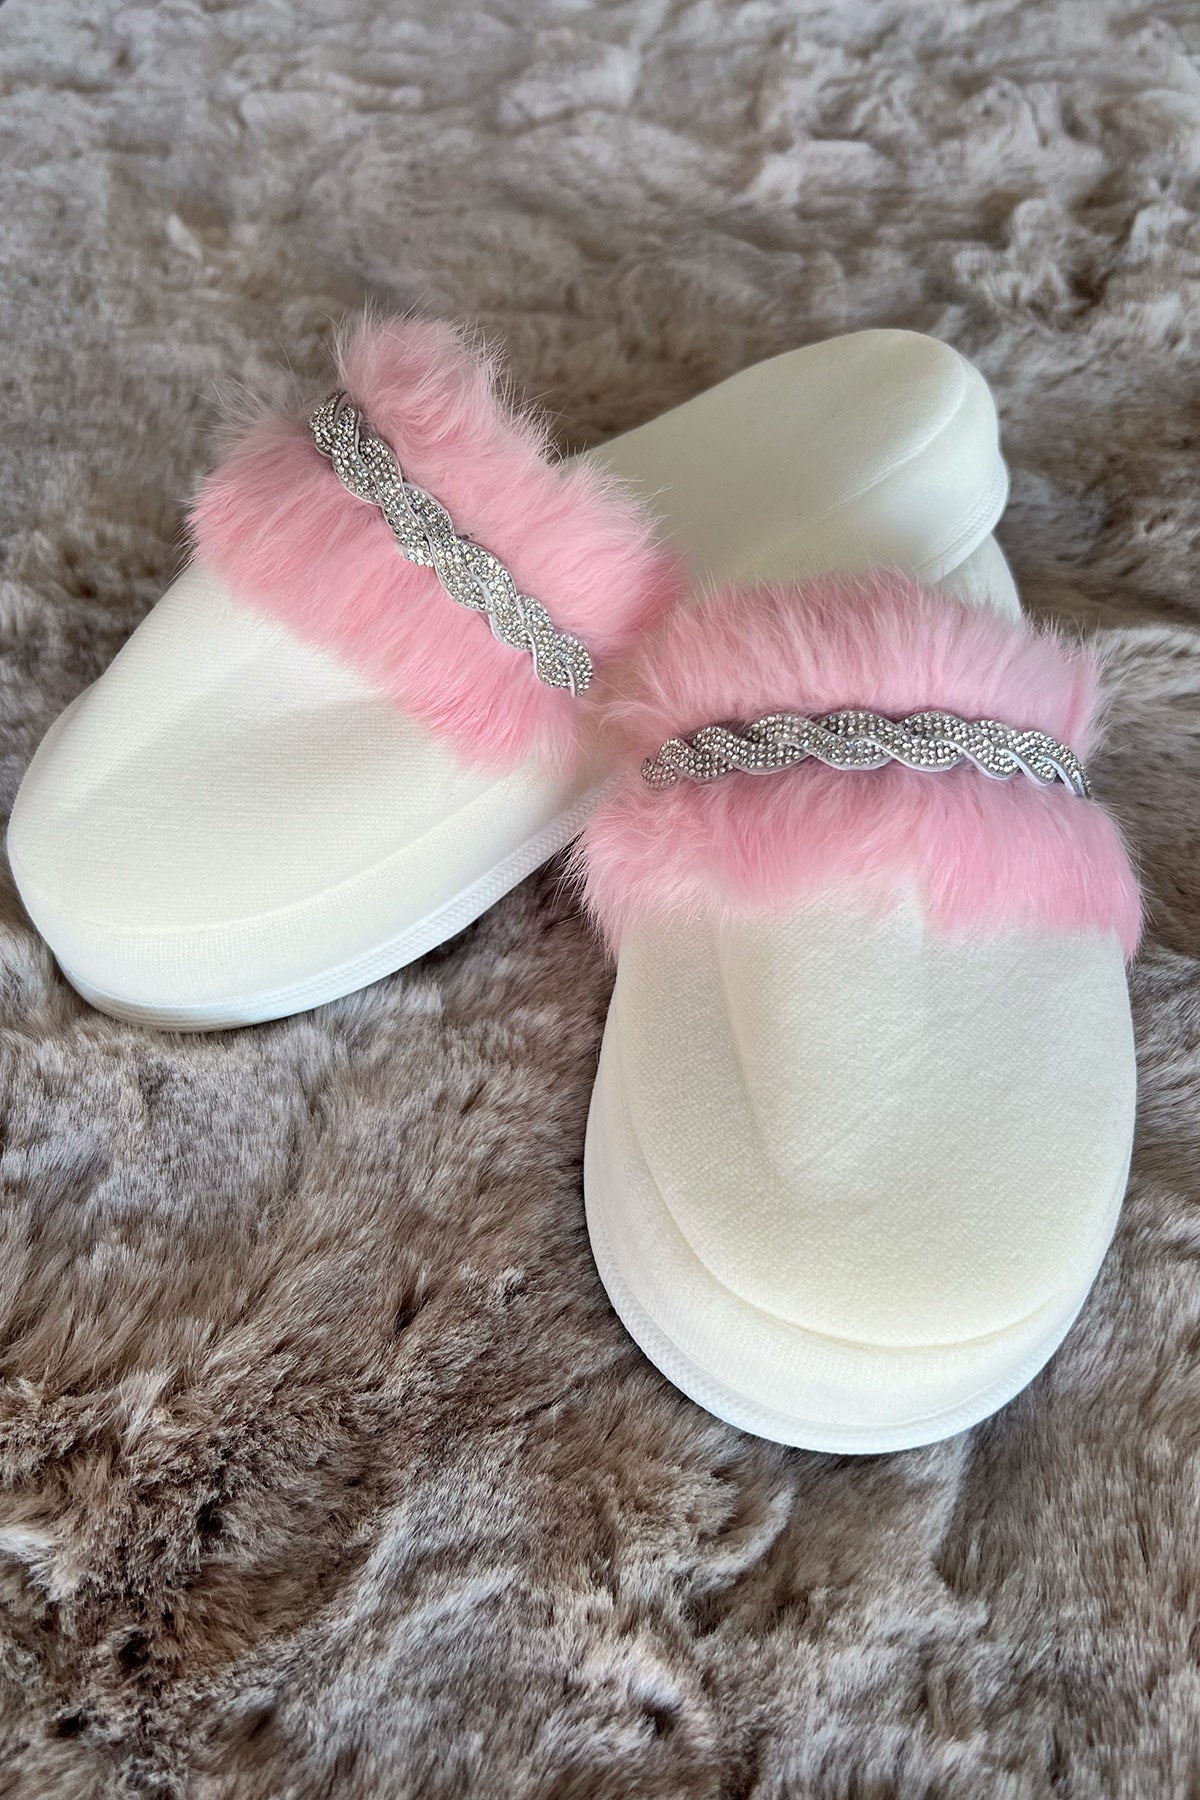 Shopymommy 75008 Feather Themed Maternity Slippers Pink